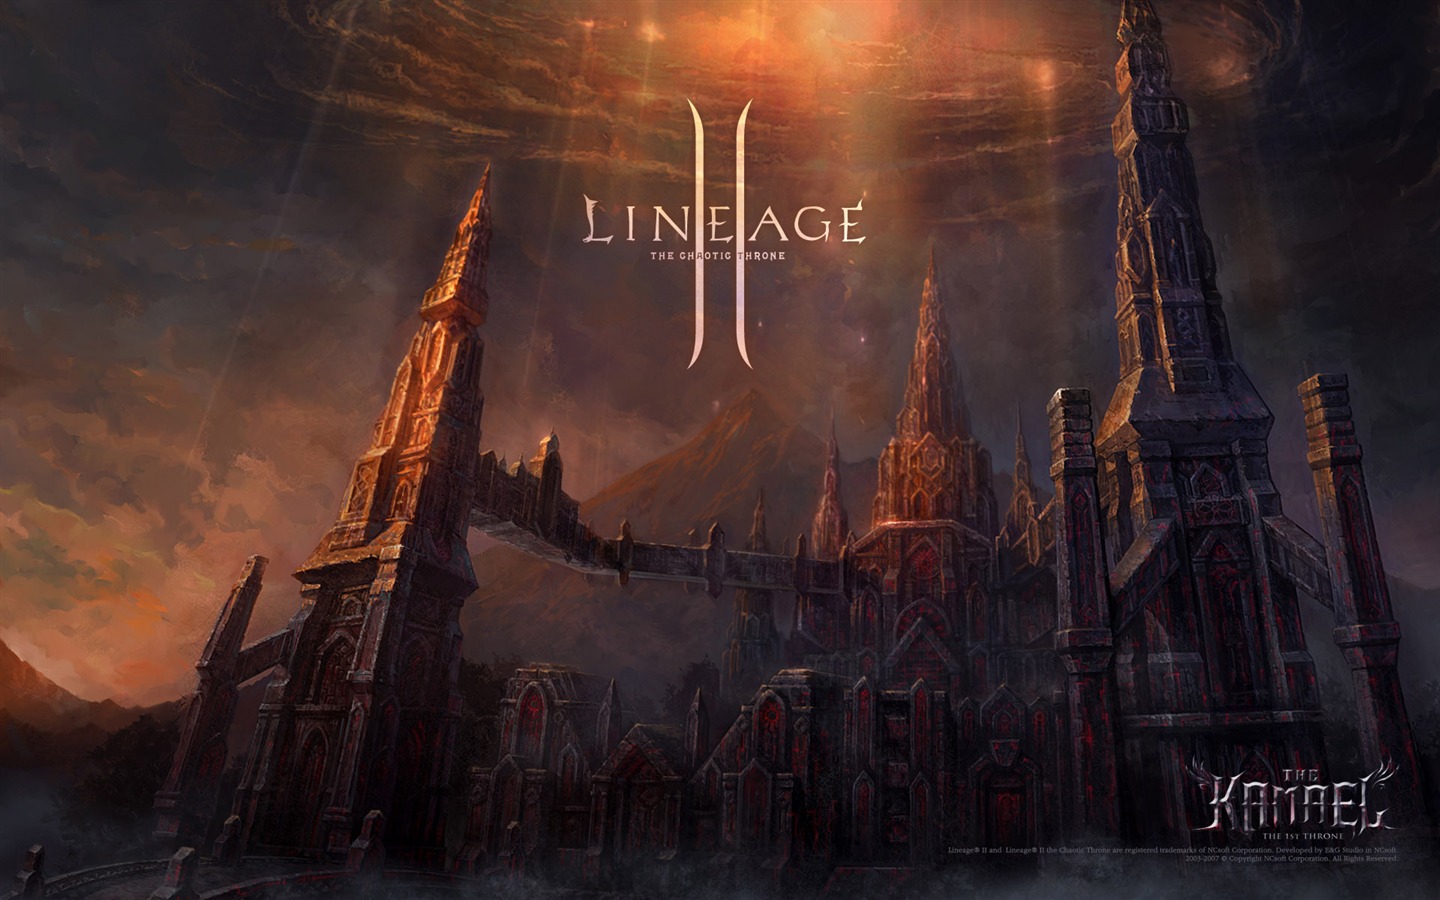 LINEAGE Ⅱ Modellierung HD-Gaming-Wallpaper #4 - 1440x900